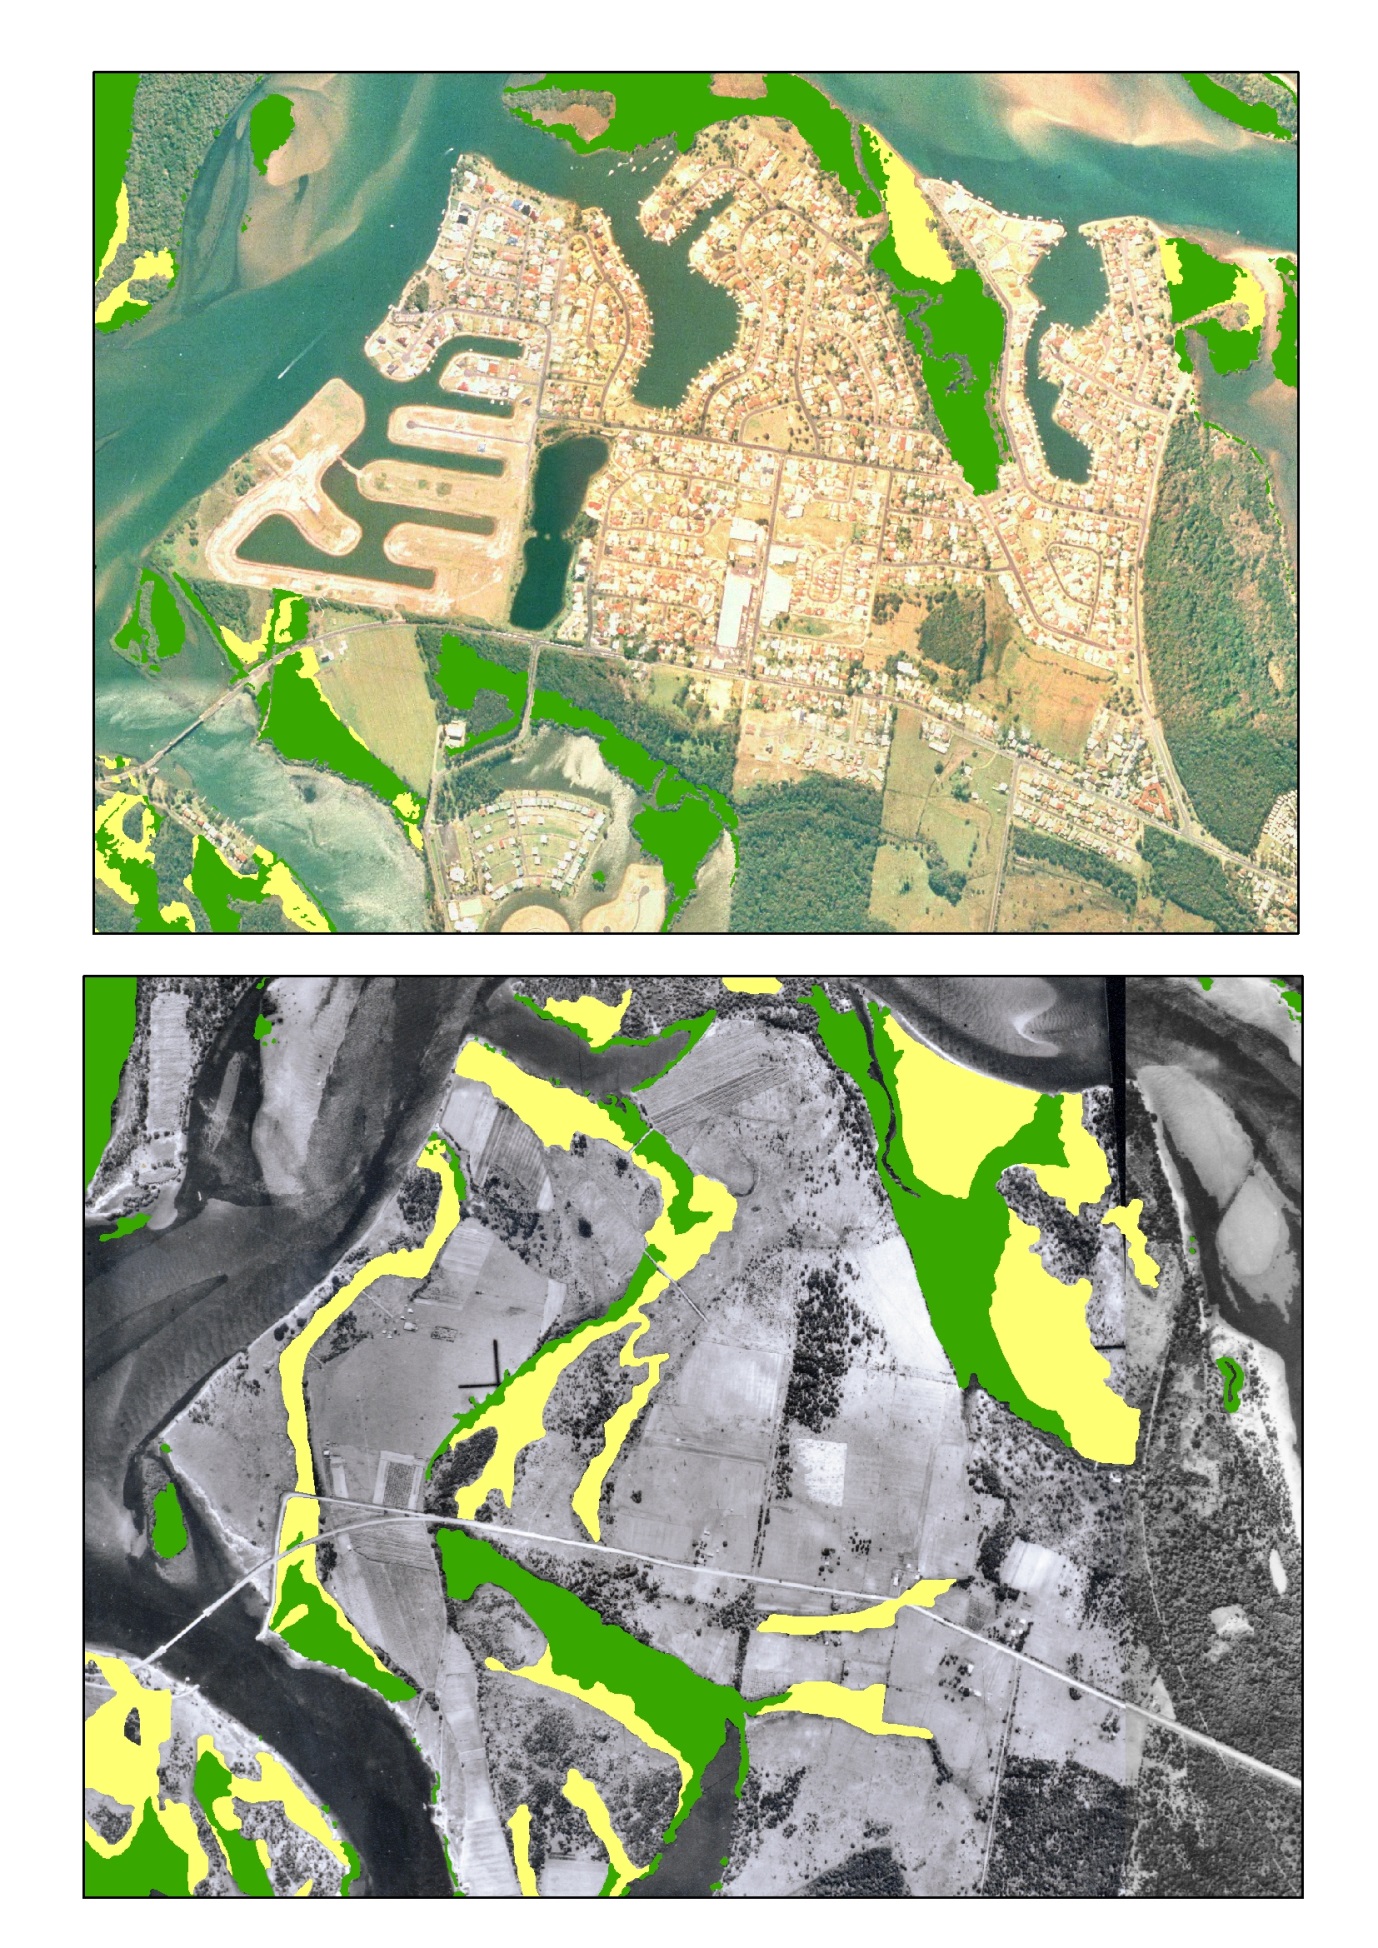 Changes in the distribution of mangrove and saltmarsh in 2009 compared to 1942 near the mouth of the Clarence River.